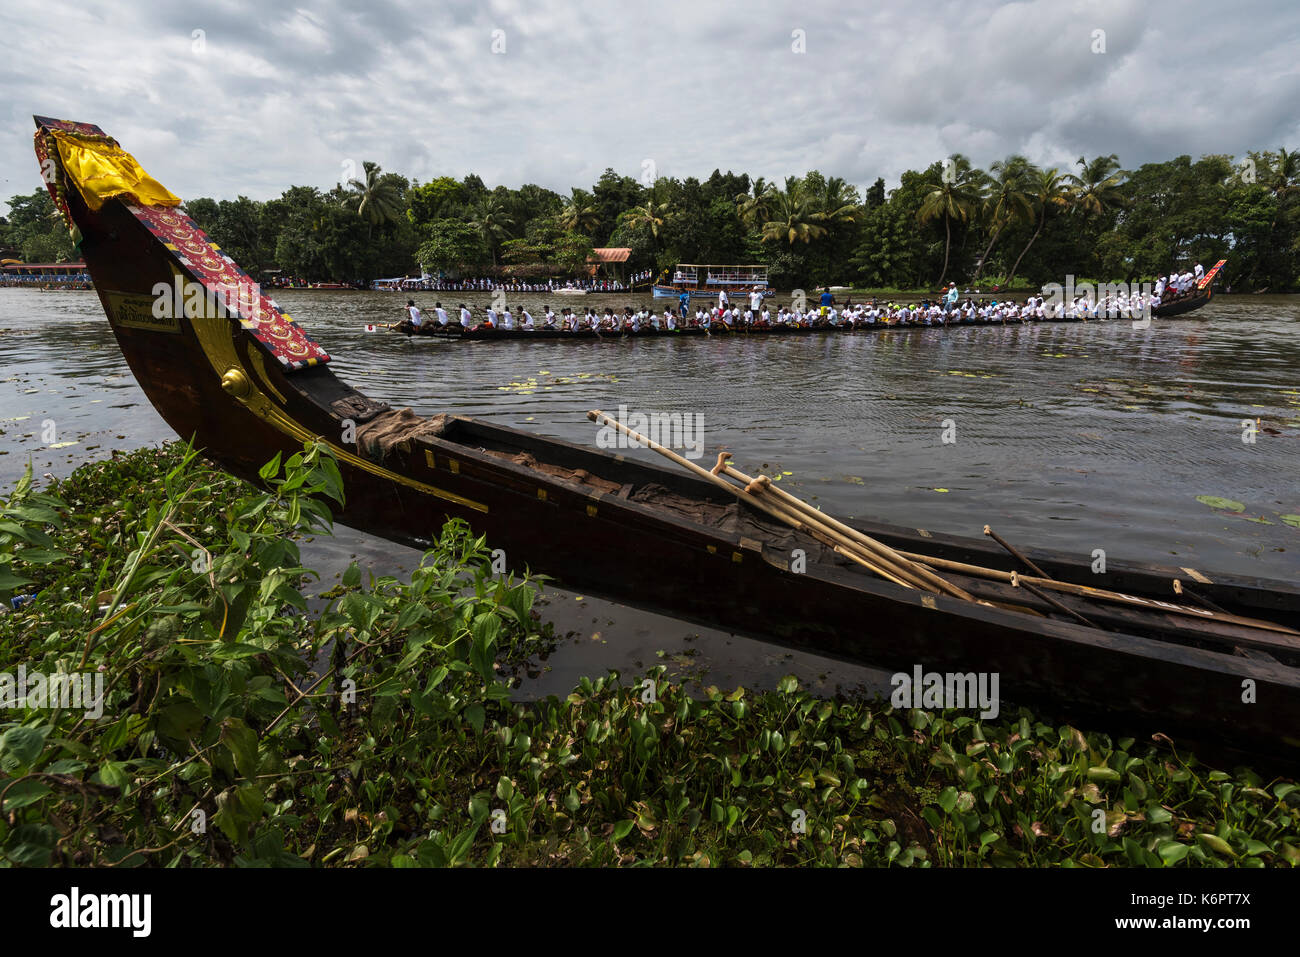 Snake boats are the fastest rowing boats. Payippad boat race is most famous for its snake boats. Stock Photo